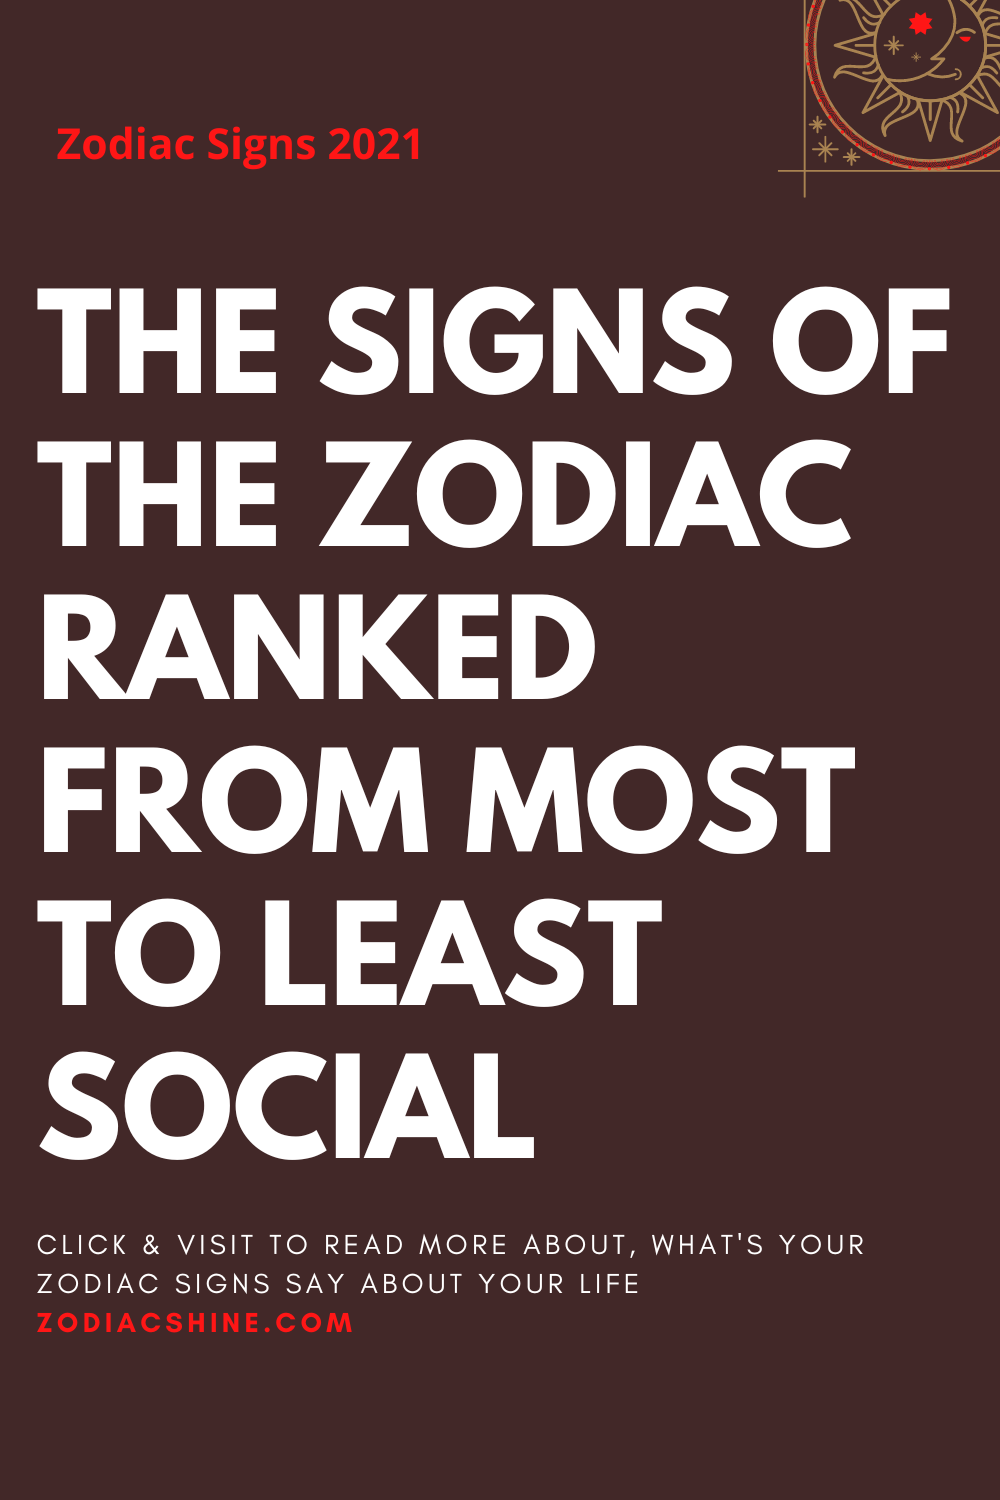 THE SIGNS OF THE ZODIAC RANKED FROM MOST TO LEAST SOCIAL